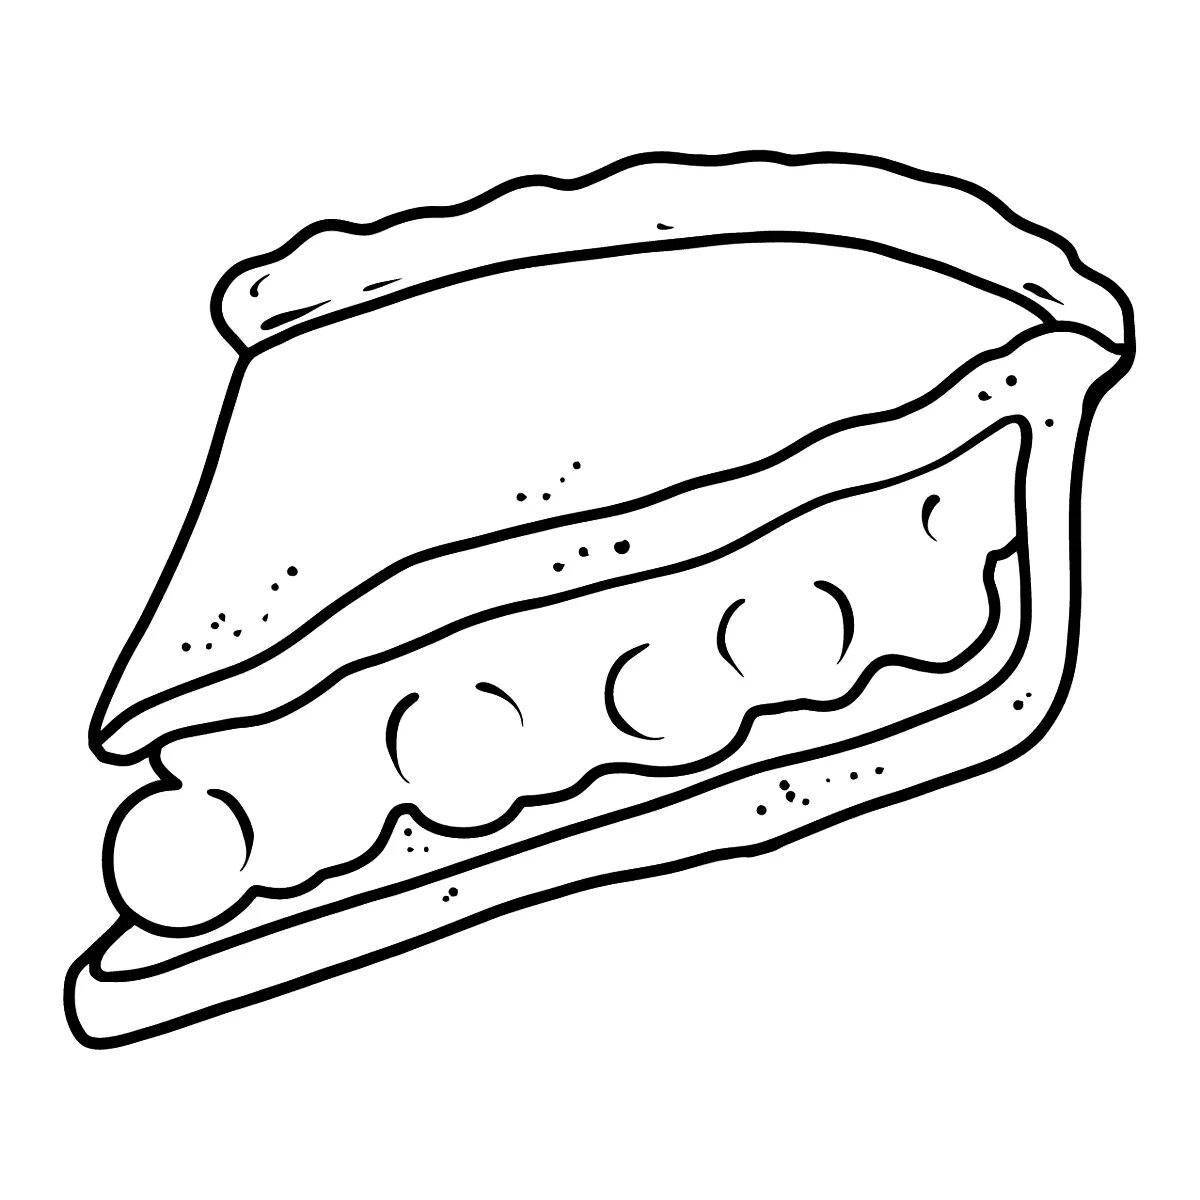 Dazzling Pie Coloring Page for Toddlers